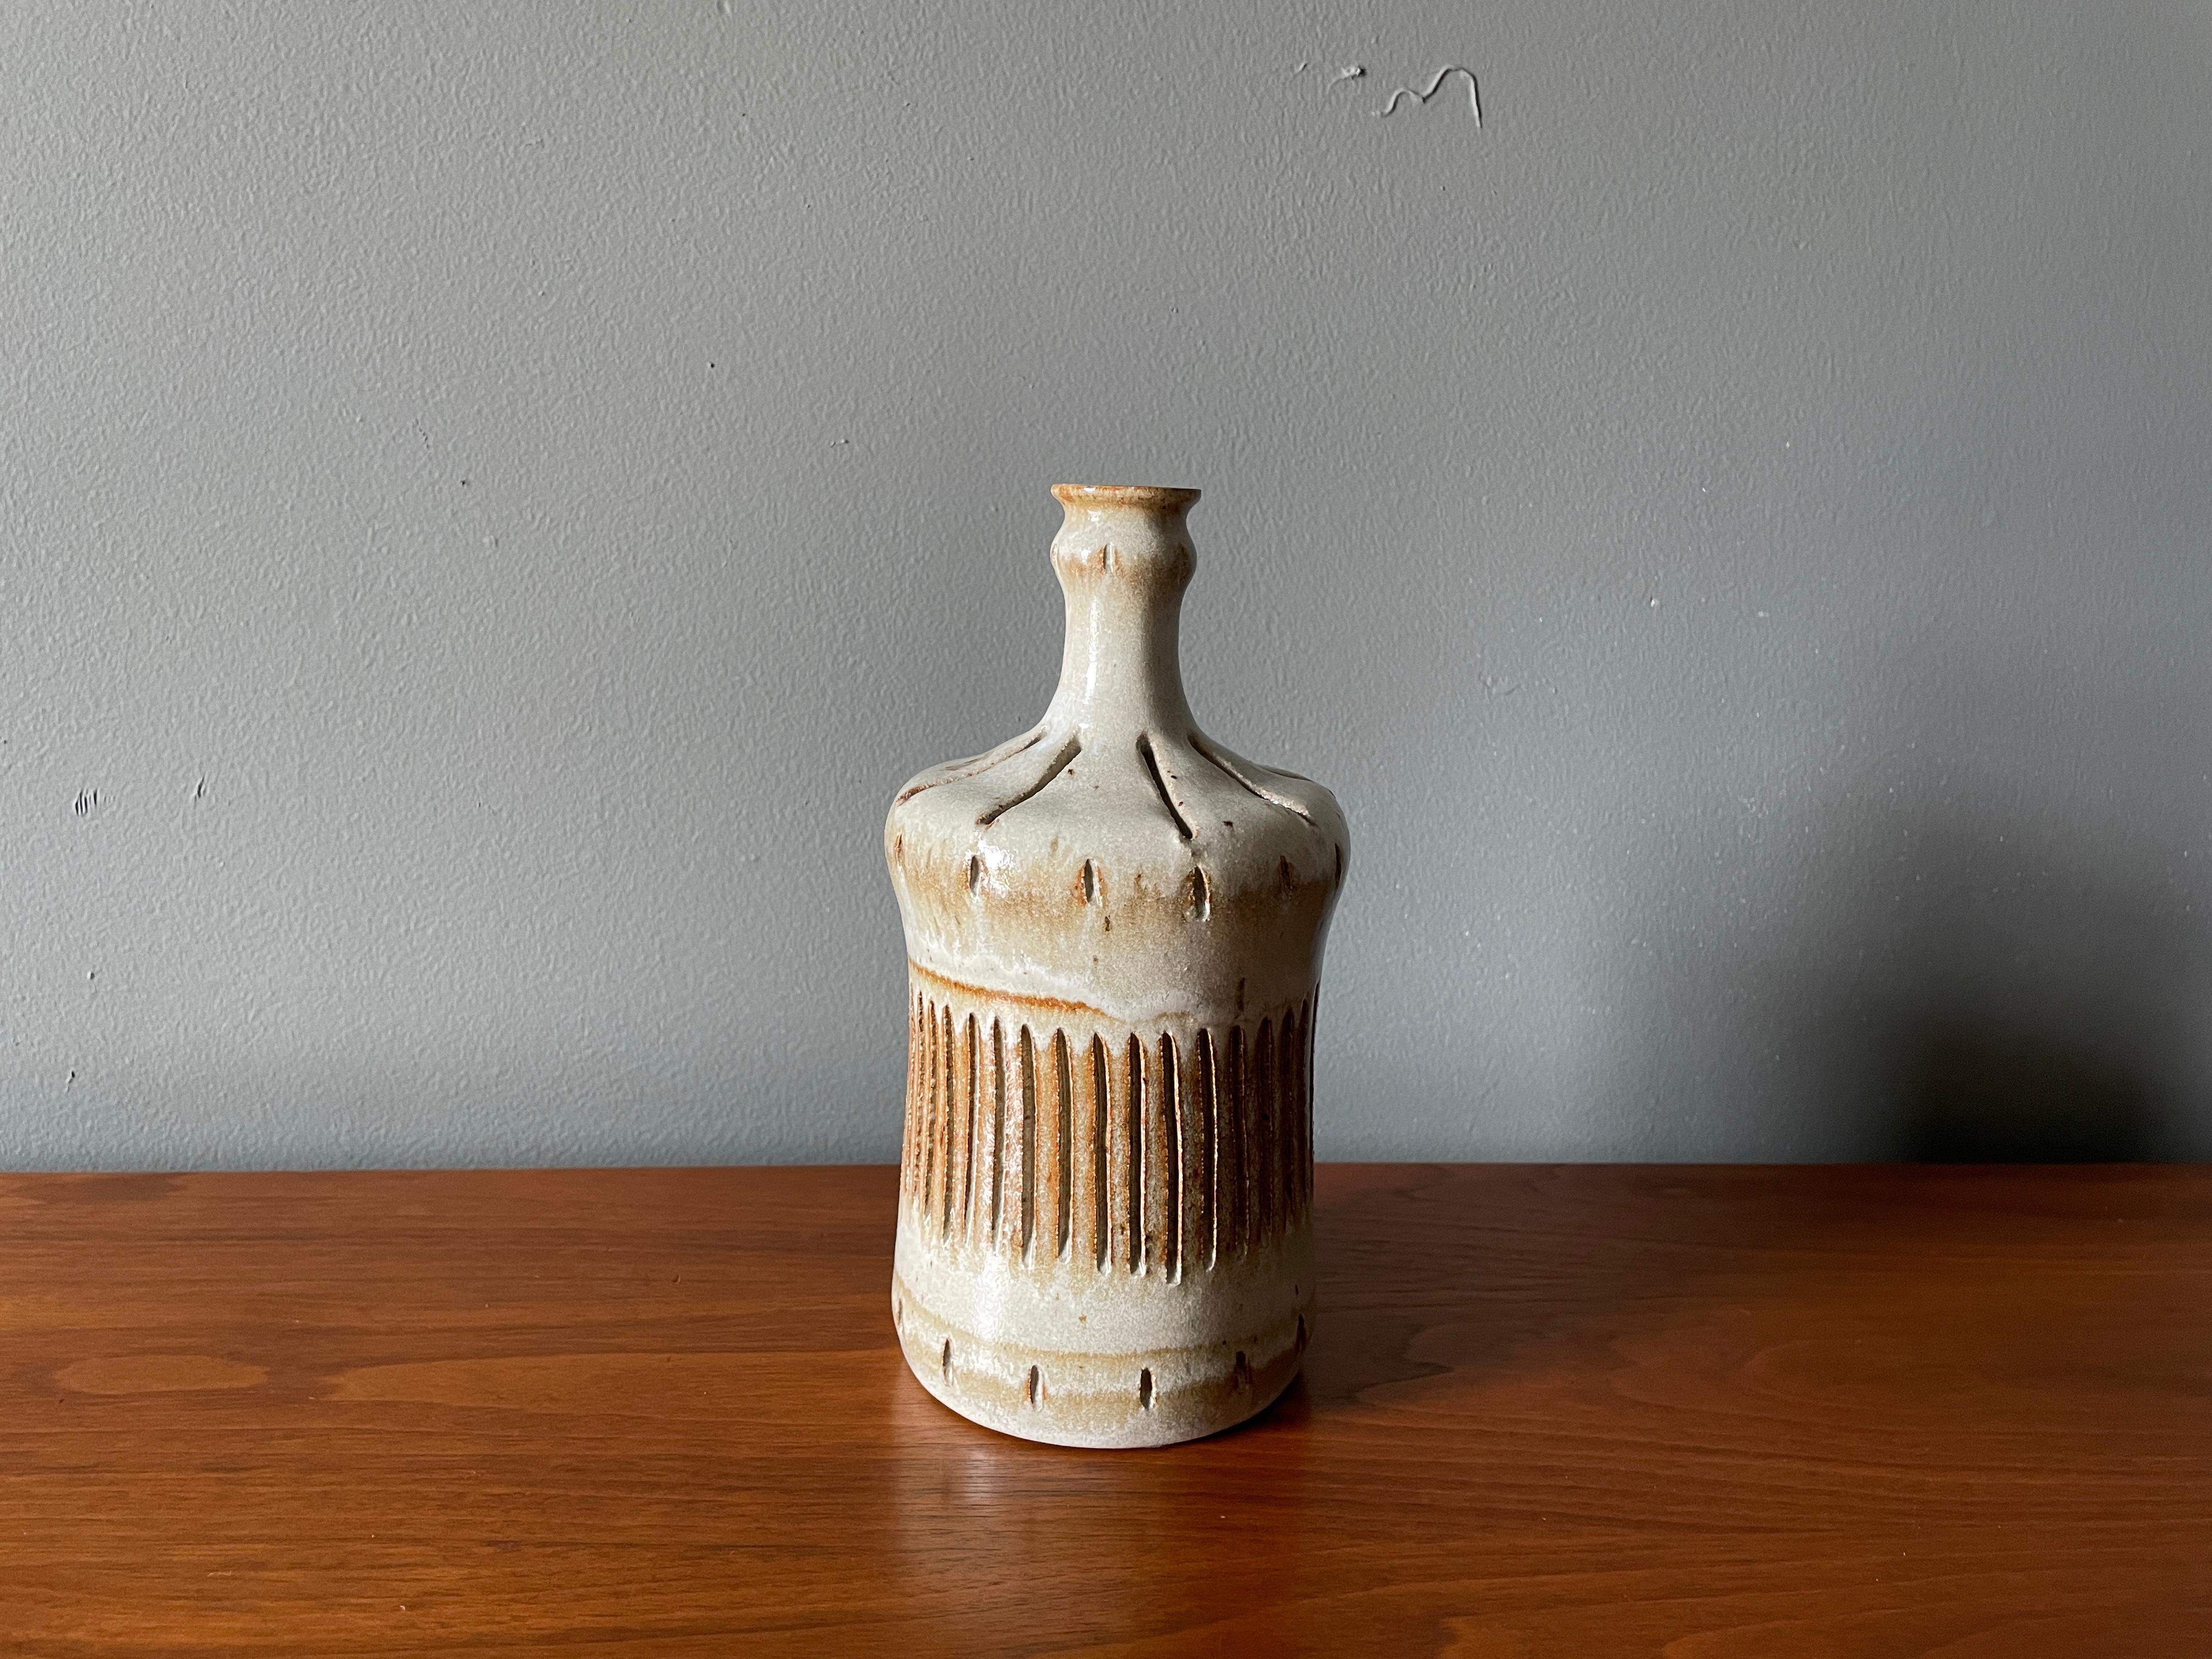 Vintage studio crafted ceramic vase. Signed and dated 1982. Clean, simple design with a beautiful glazing and composition.